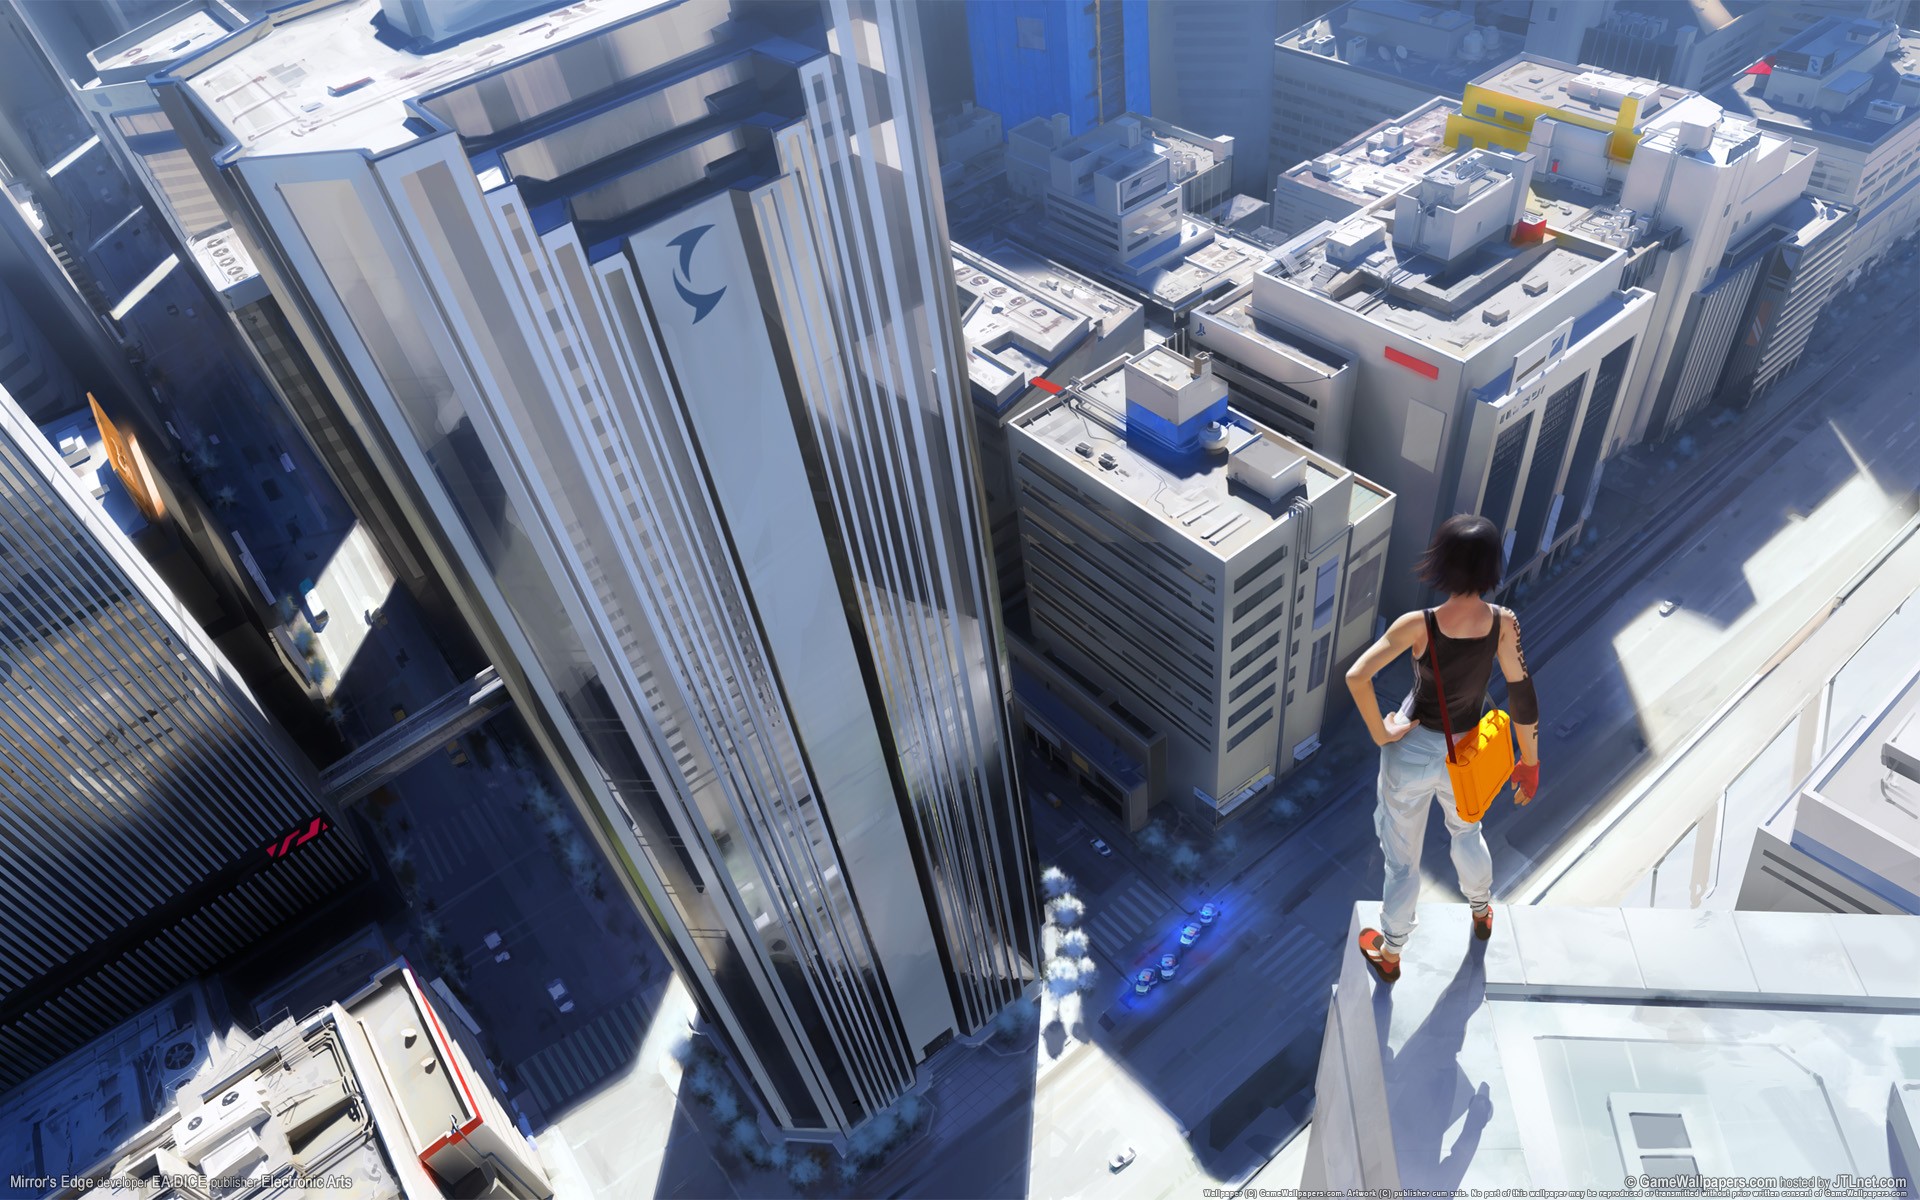 General 1920x1200 city aerial view Mirror's Edge Faith Connors rooftops video games PC gaming EA DICE Electronic Arts standing cityscape video game girls video game art digital art